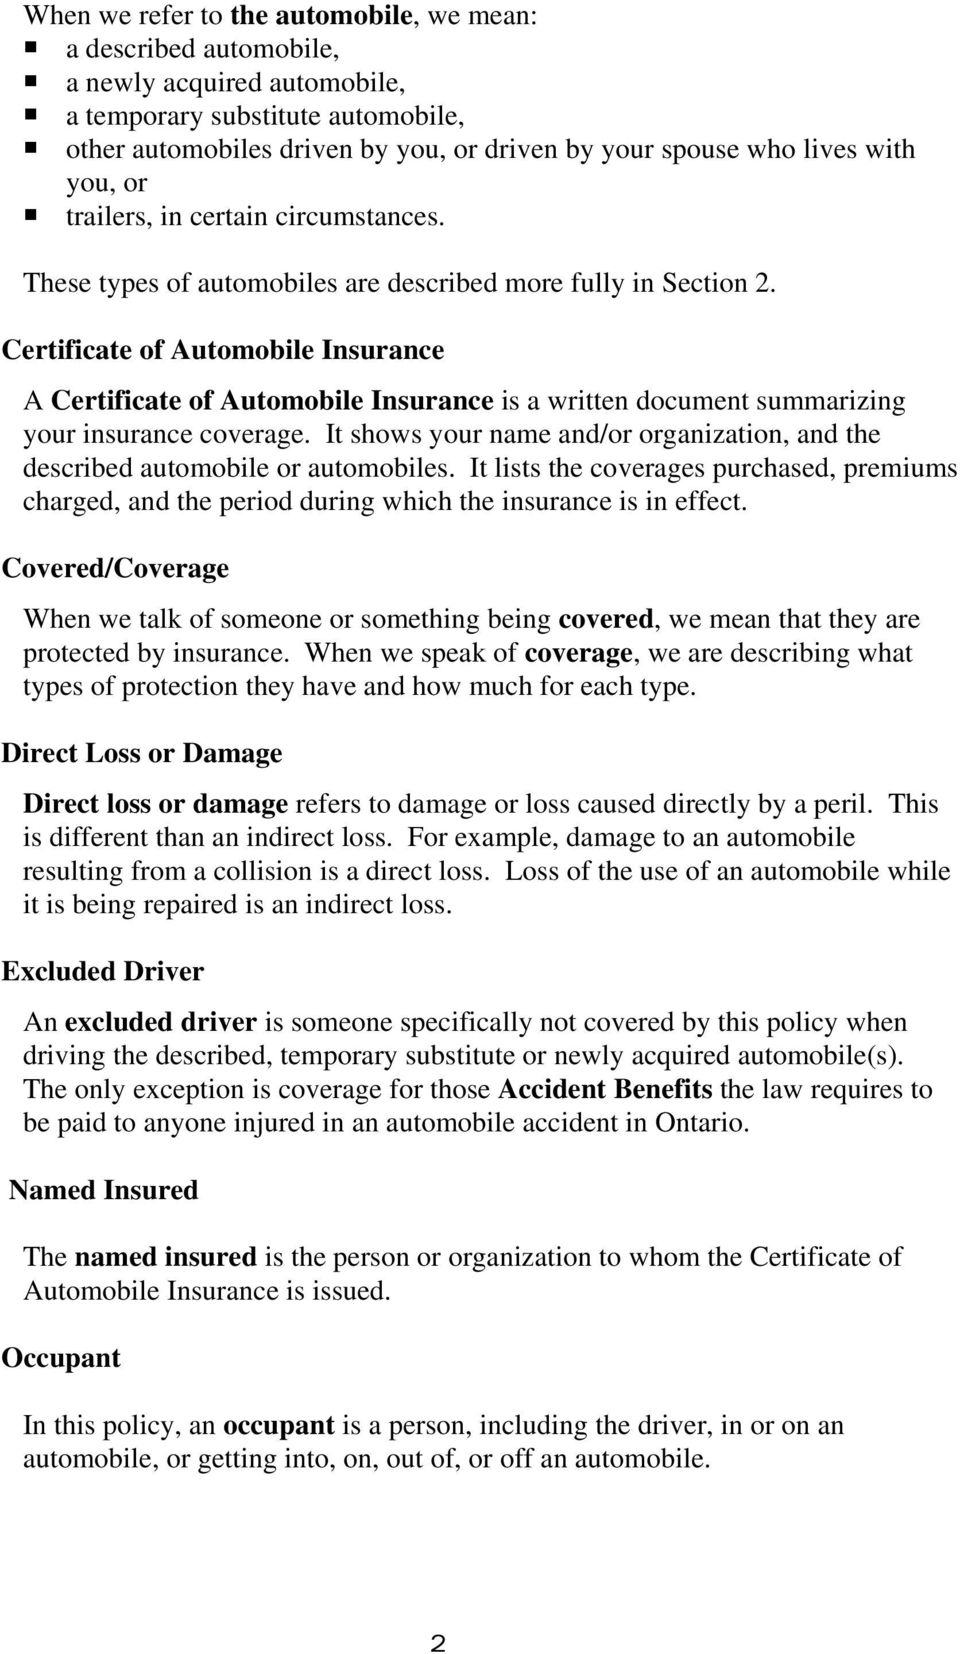 Certificate of Automobile Insurance A Certificate of Automobile Insurance is a written document summarizing your insurance coverage.